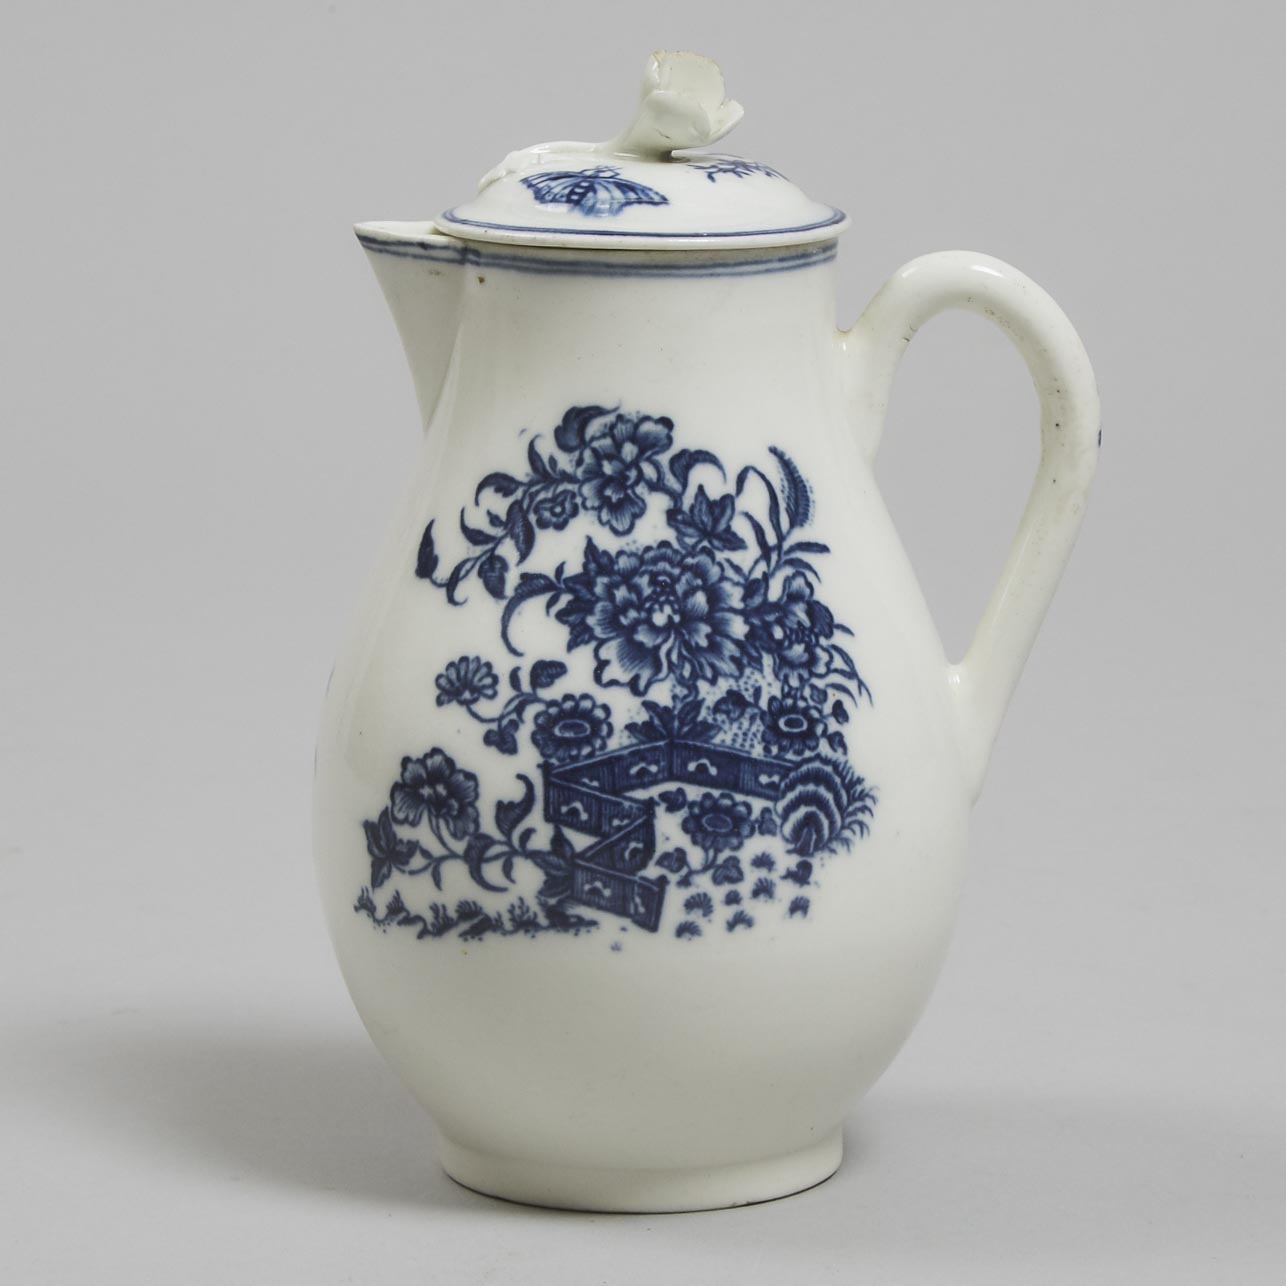 Caughley 'Fence' Pattern Covered Milk Jug, c.1780